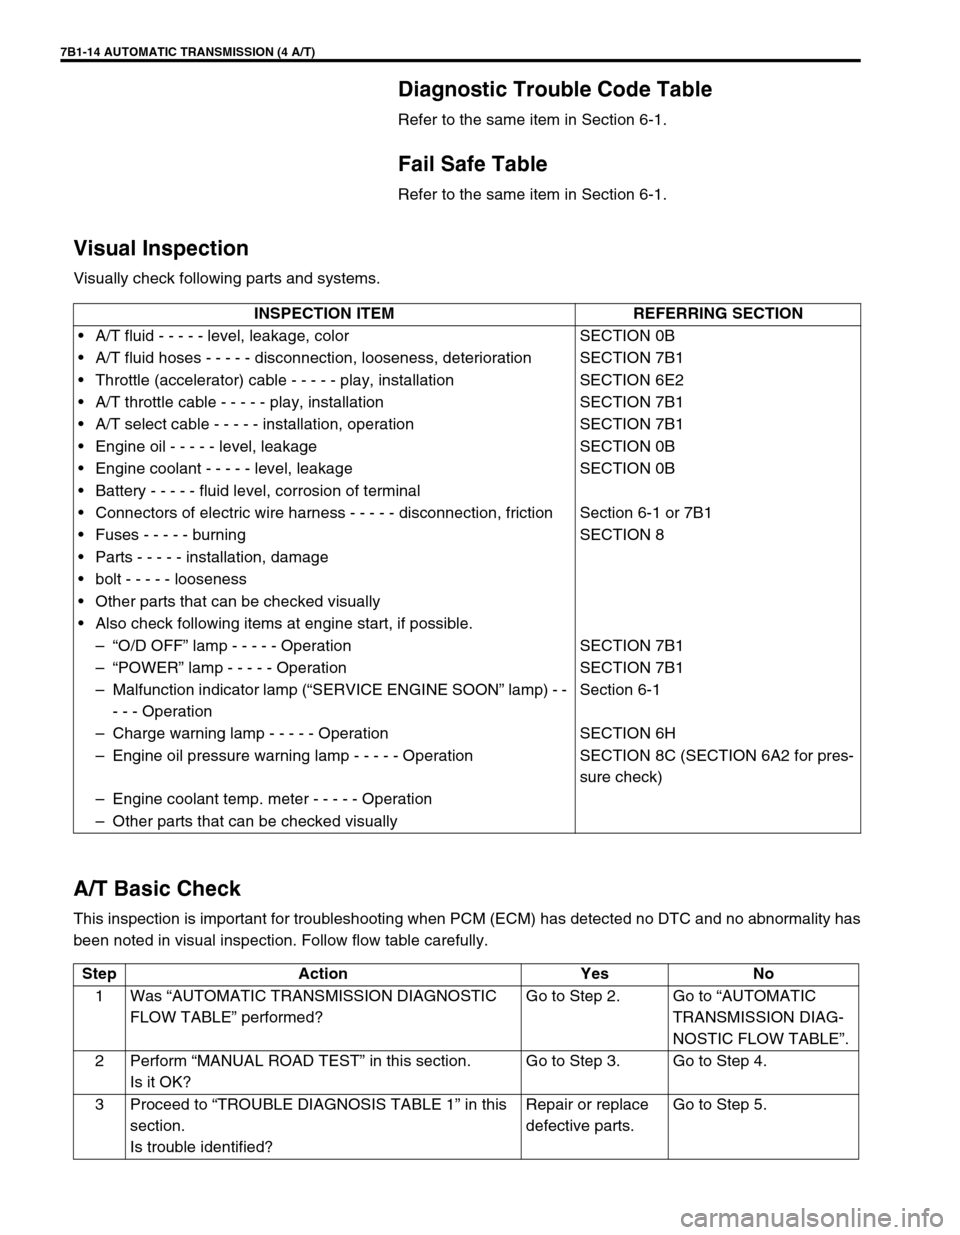 SUZUKI GRAND VITARA 2001 2.G Owners Manual 7B1-14 AUTOMATIC TRANSMISSION (4 A/T)
Diagnostic Trouble Code Table
Refer to the same item in Section 6-1.
Fail Safe Table
Refer to the same item in Section 6-1.
Visual Inspection
Visually check follo